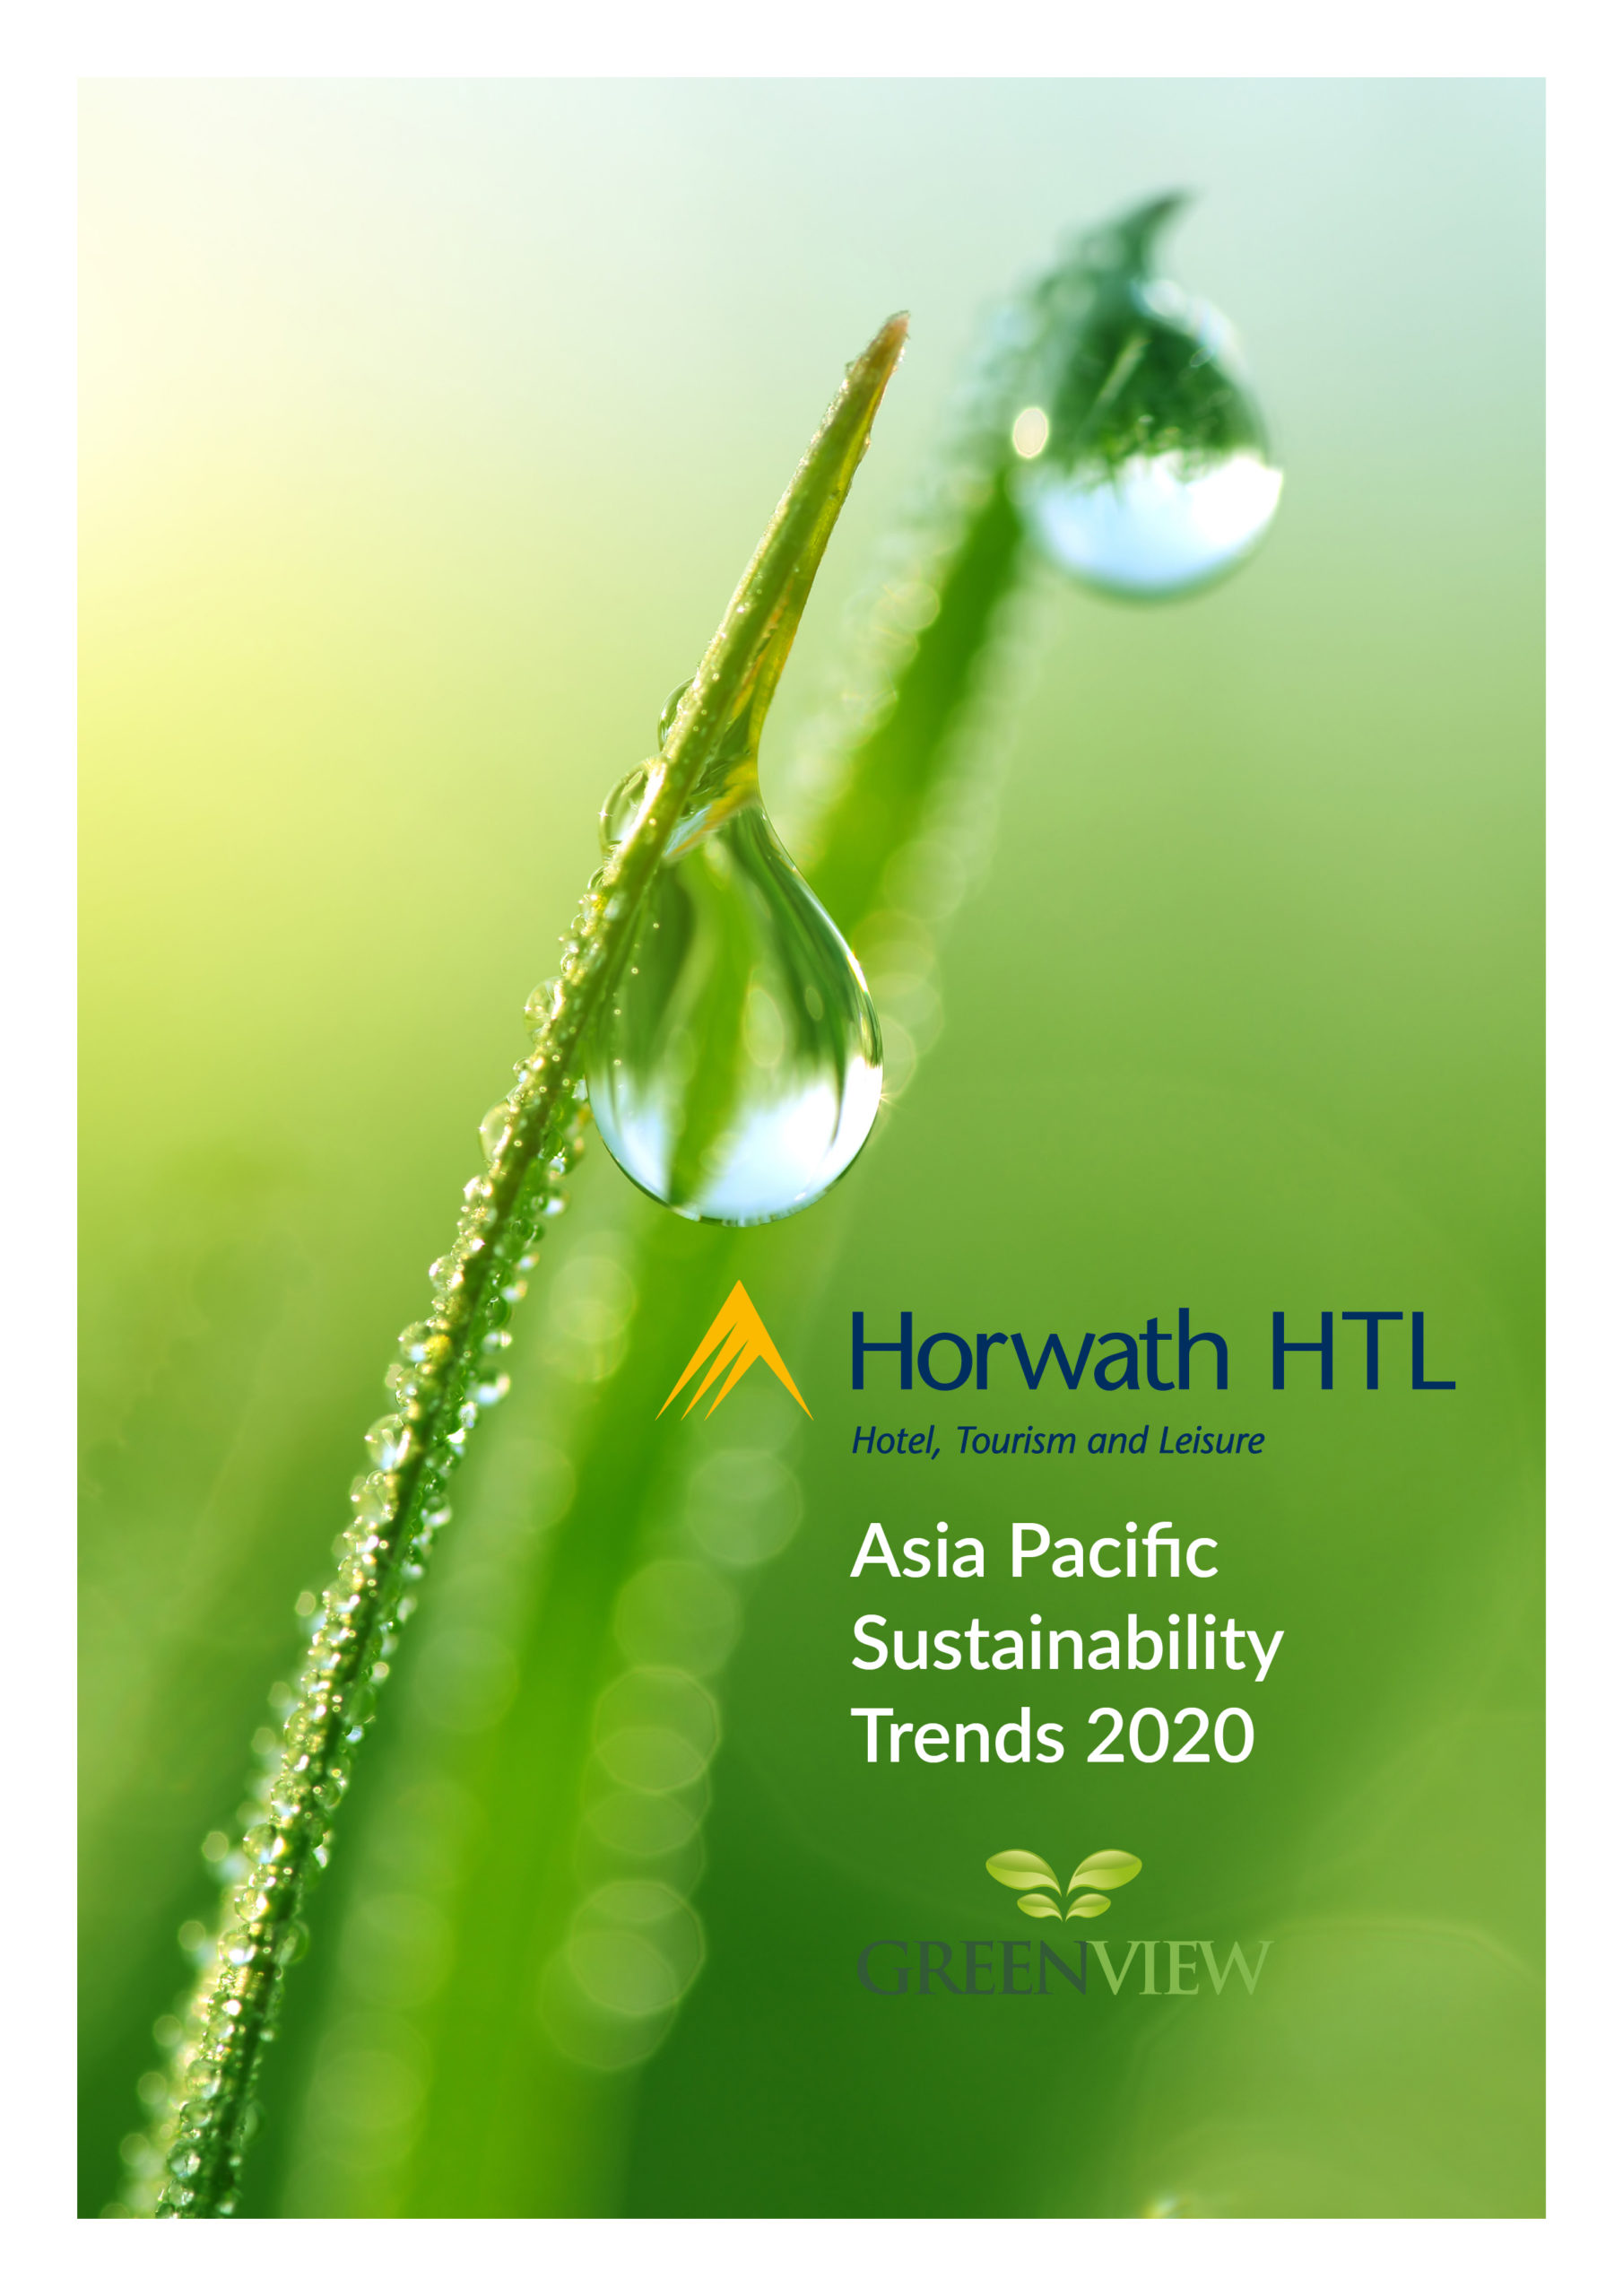 Asia Pacific: Sustainability Data Trends 2020